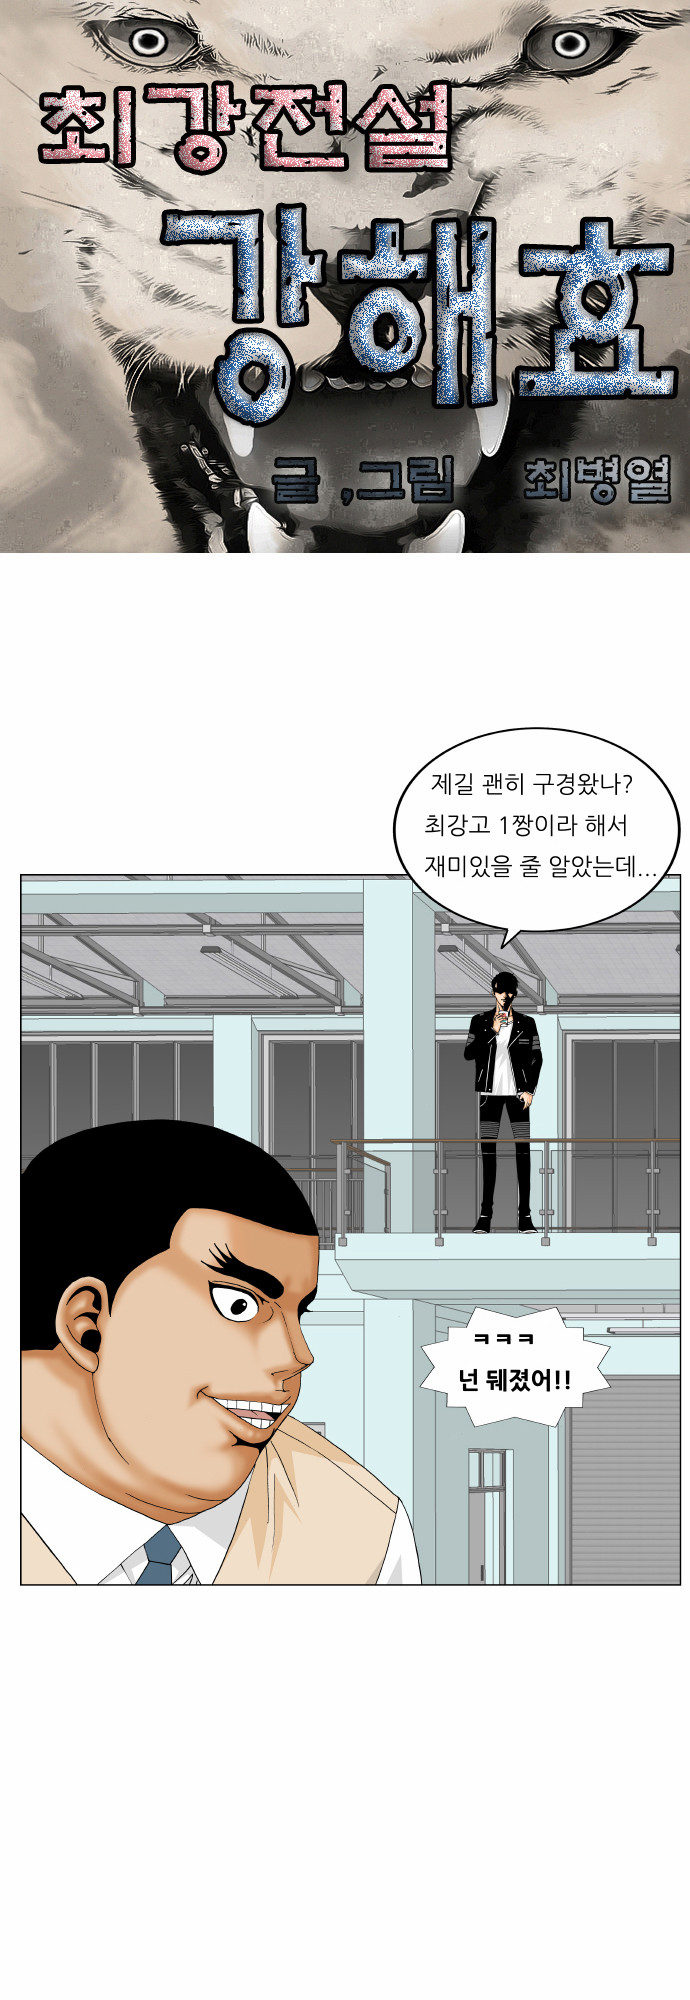 Ultimate Legend - Kang Hae Hyo - Chapter 178 - Page 1